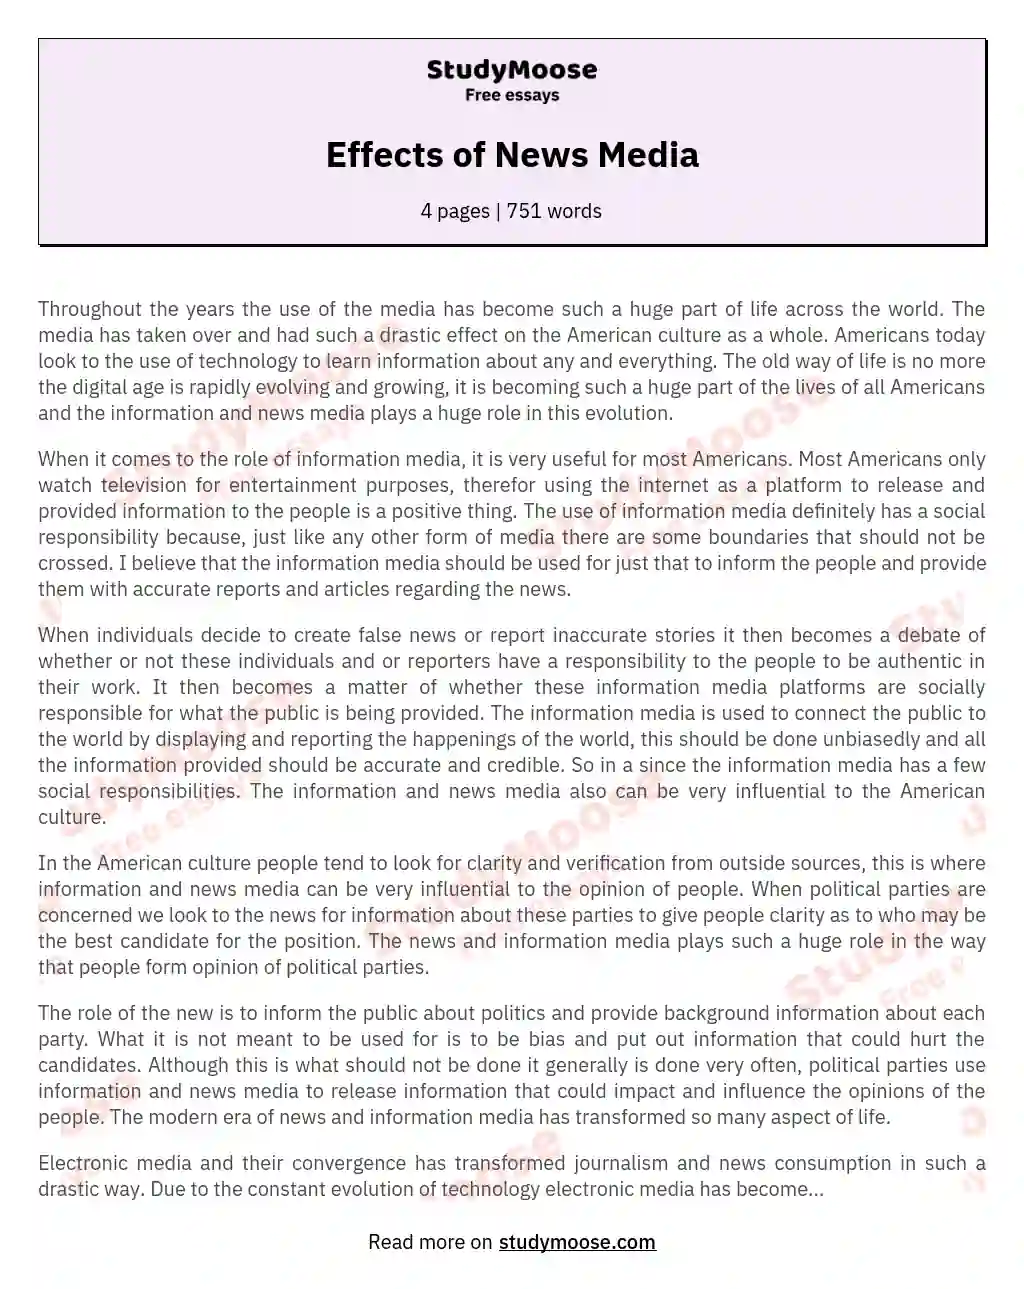 Effects of News Media